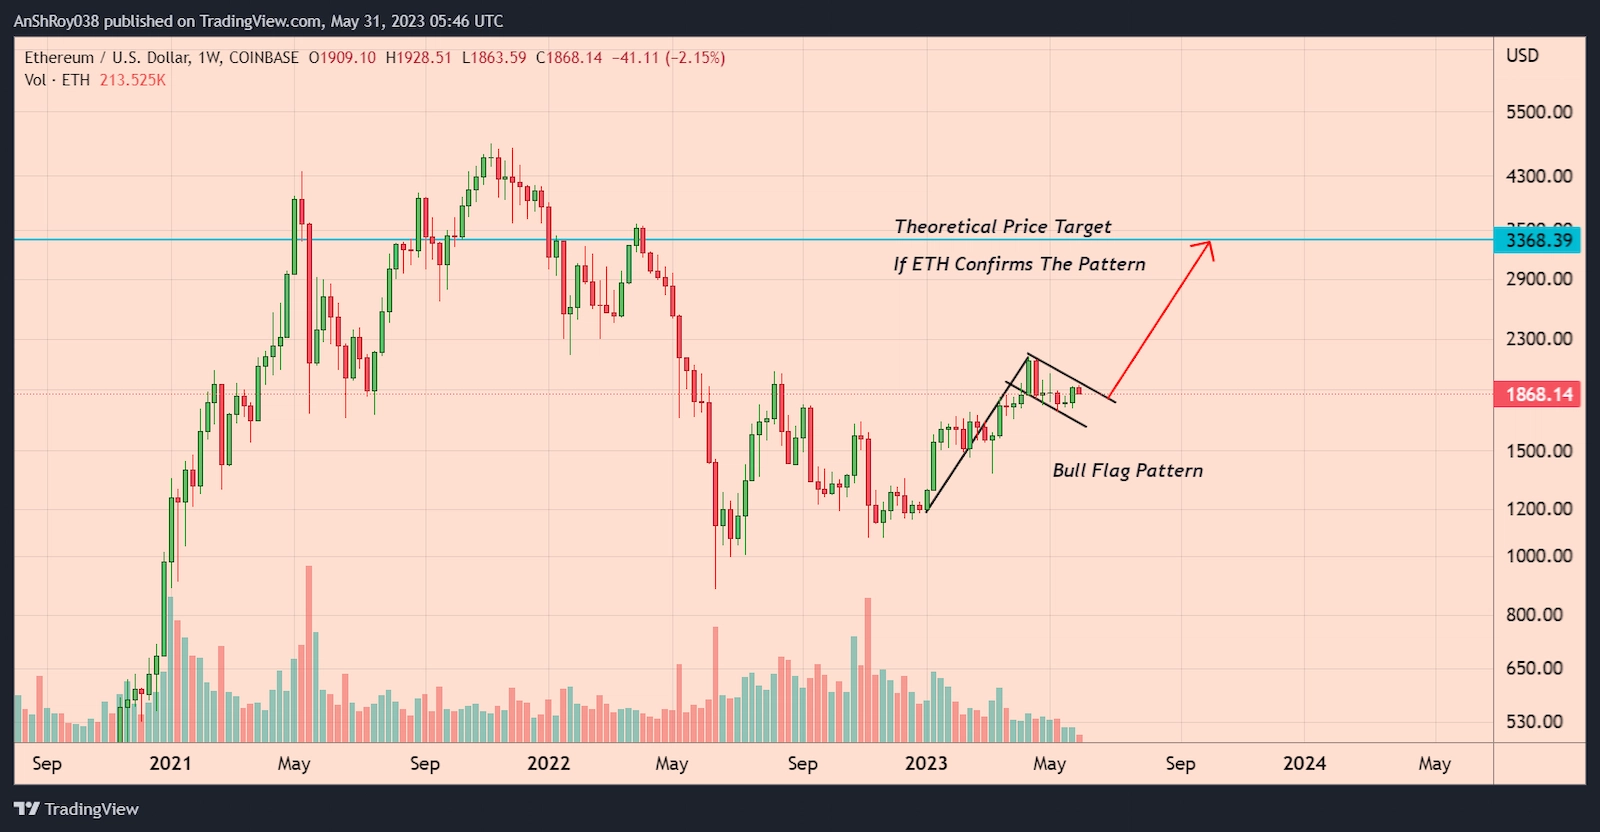 ETH price has formed a bullish technical pattern with an 80% price target